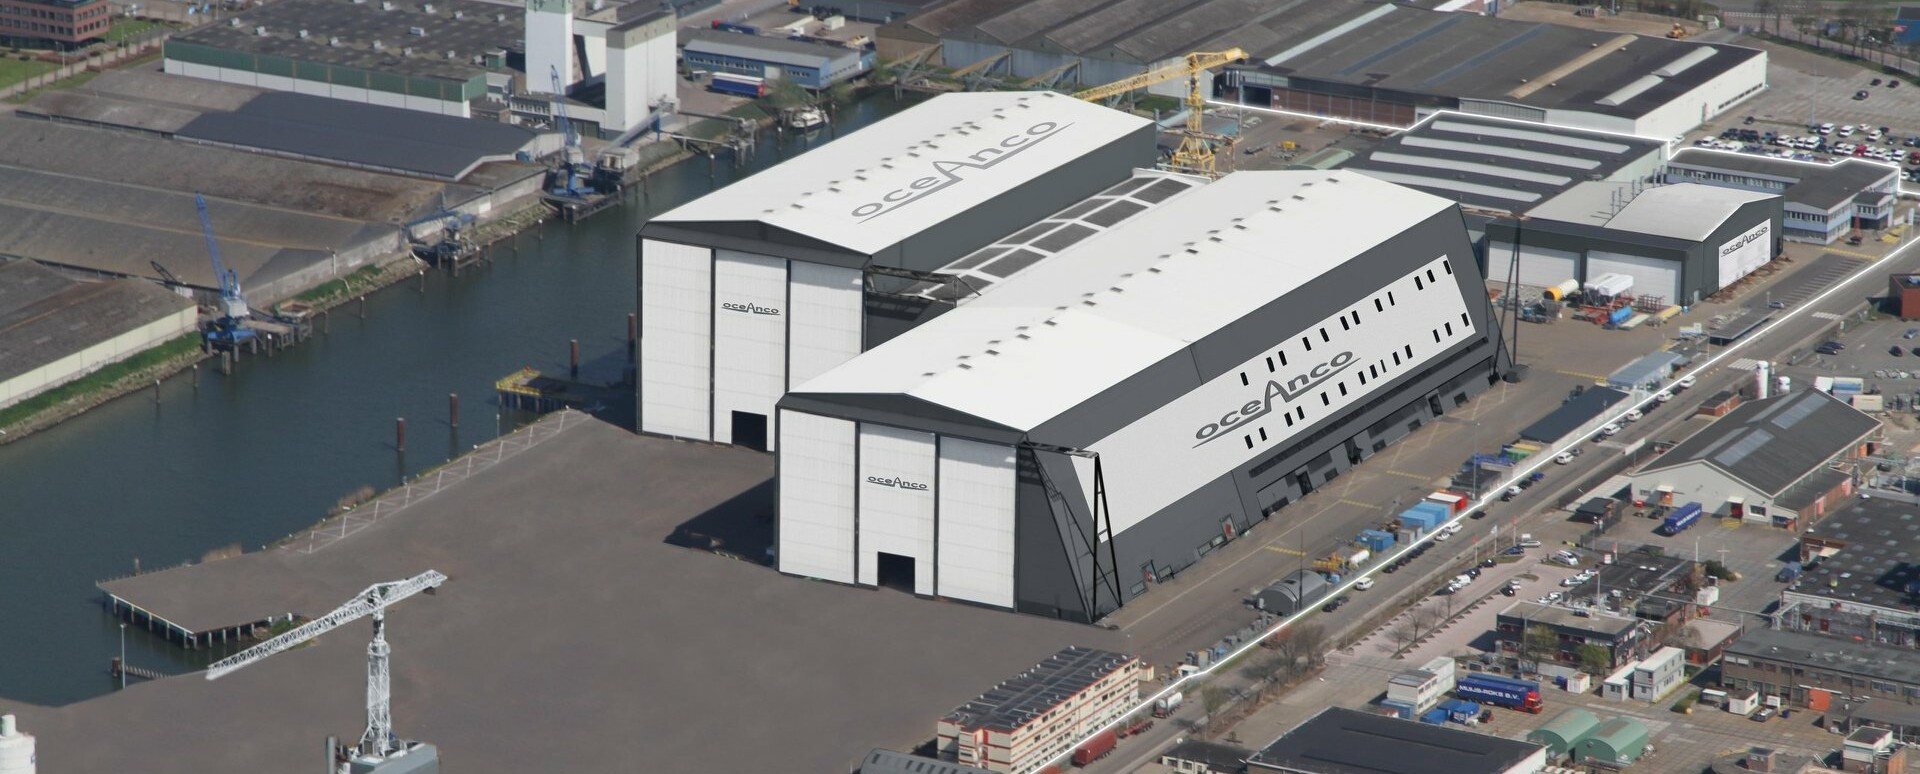                                                                                                     Oceanco to expand yard facilities
                                                                                            